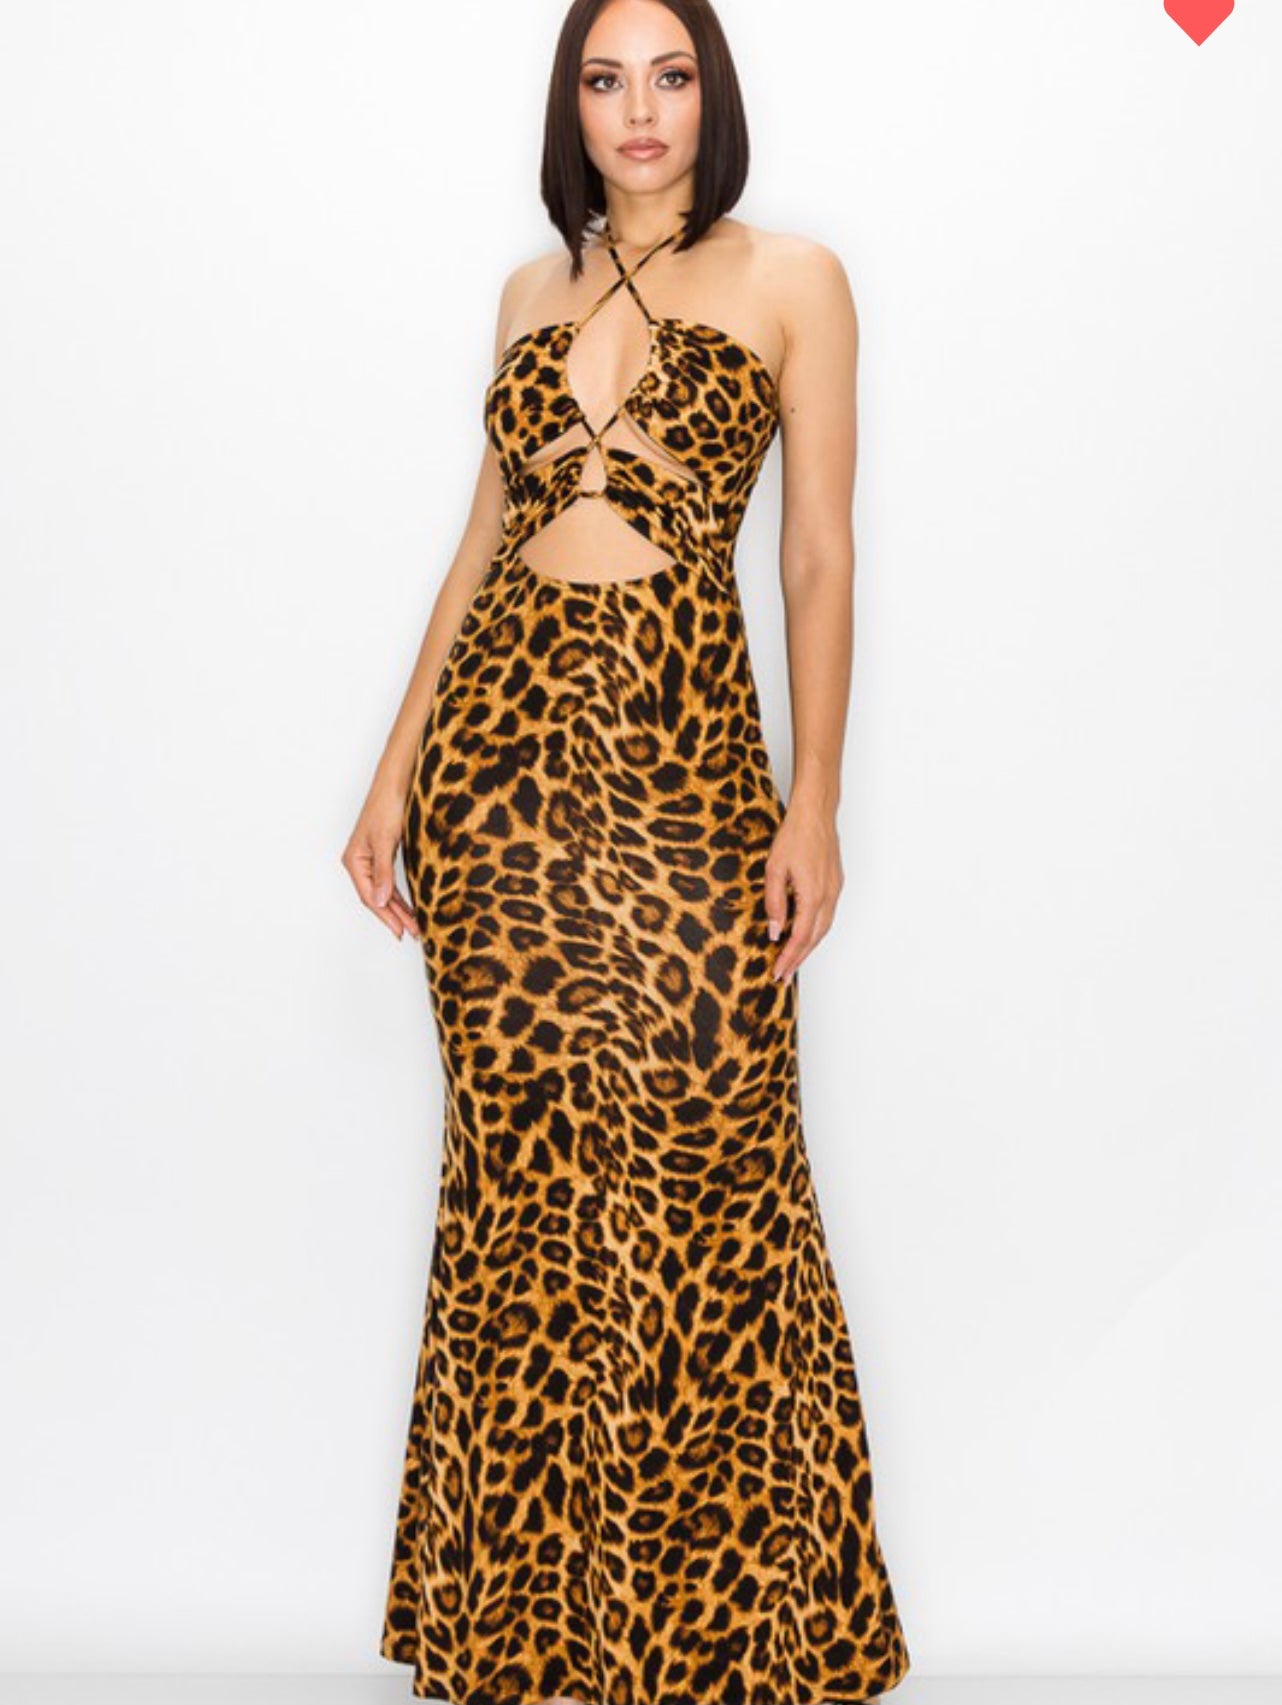 The Sexy Side of Leopard Dress